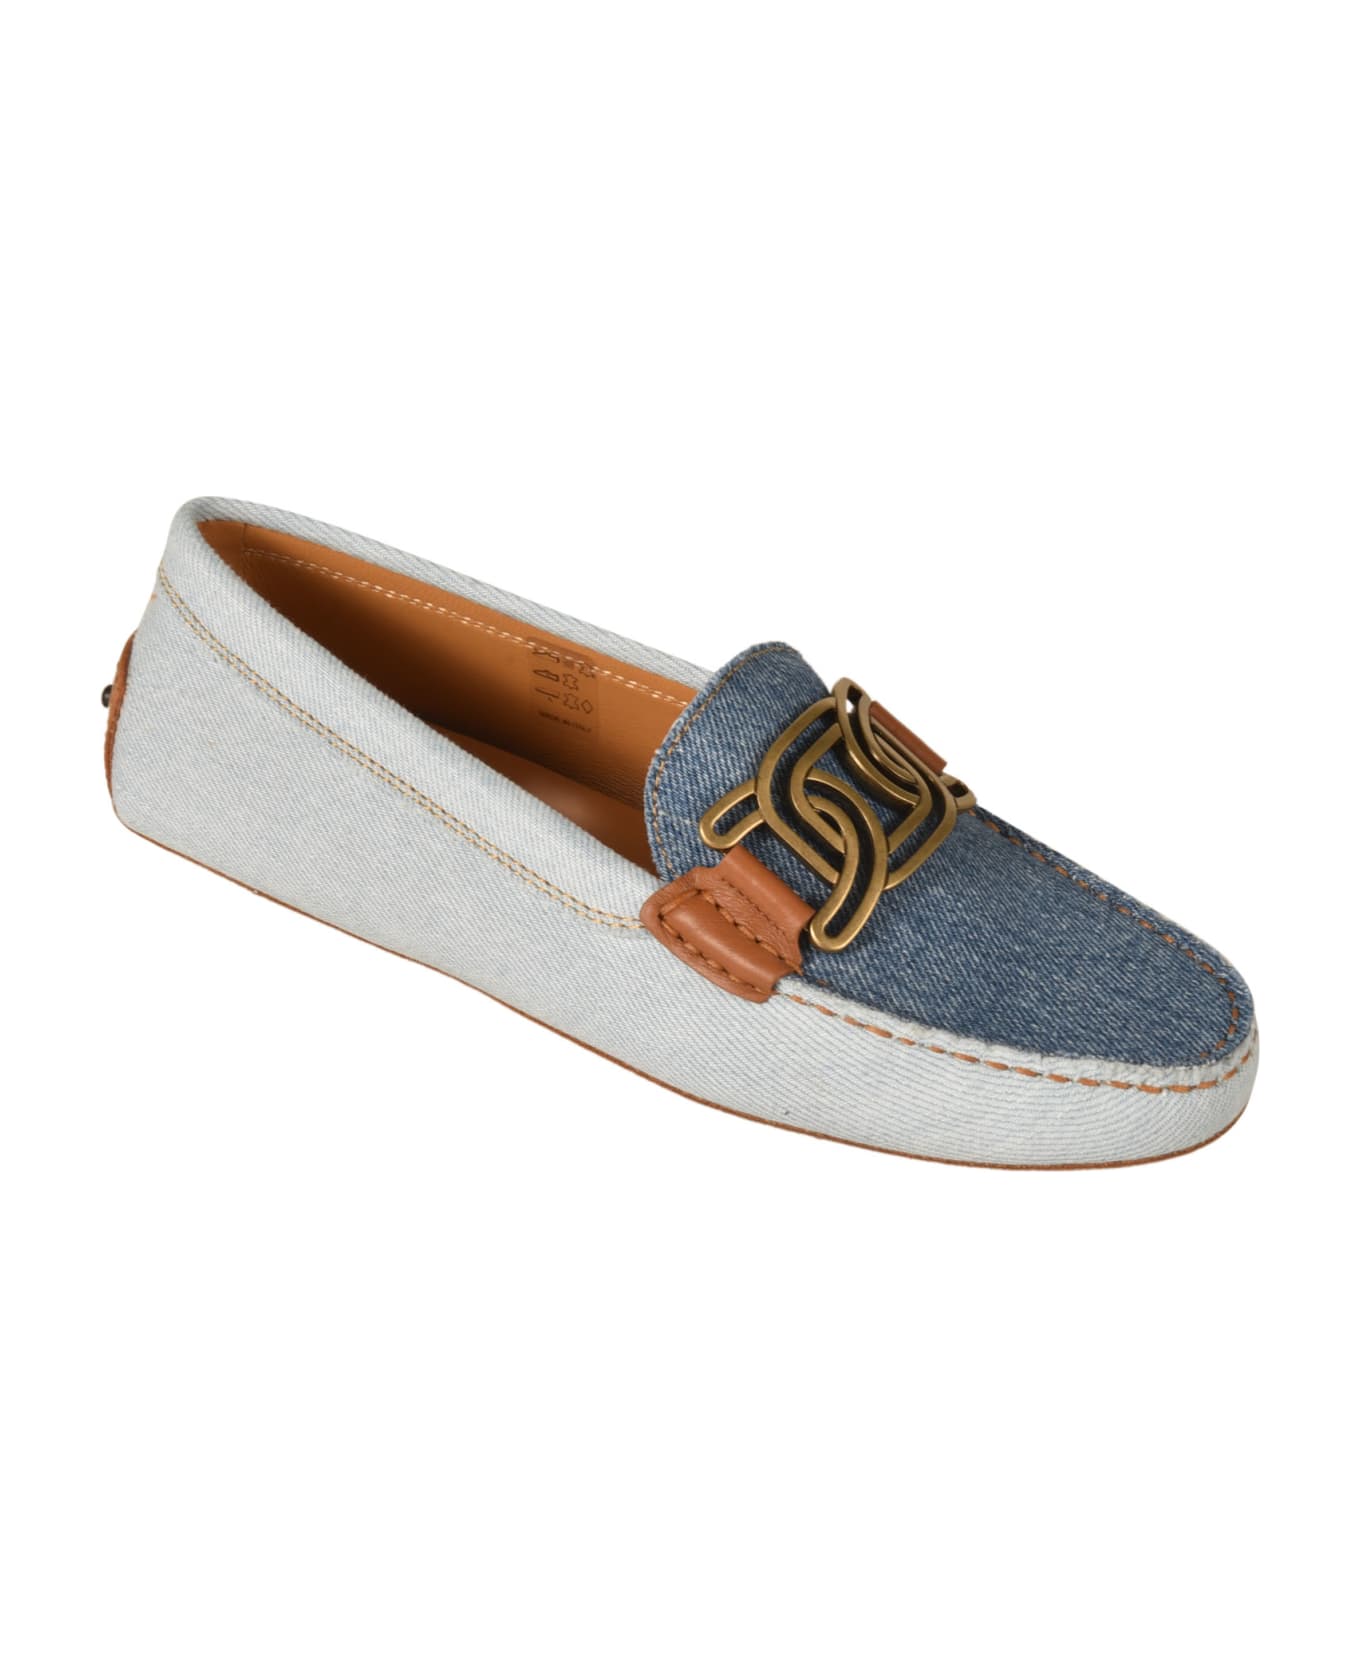 Tod's Catena Loafers - Zzeu Ceruleo Scuro/blue Horizzontale/kenia Scuro フラットシューズ